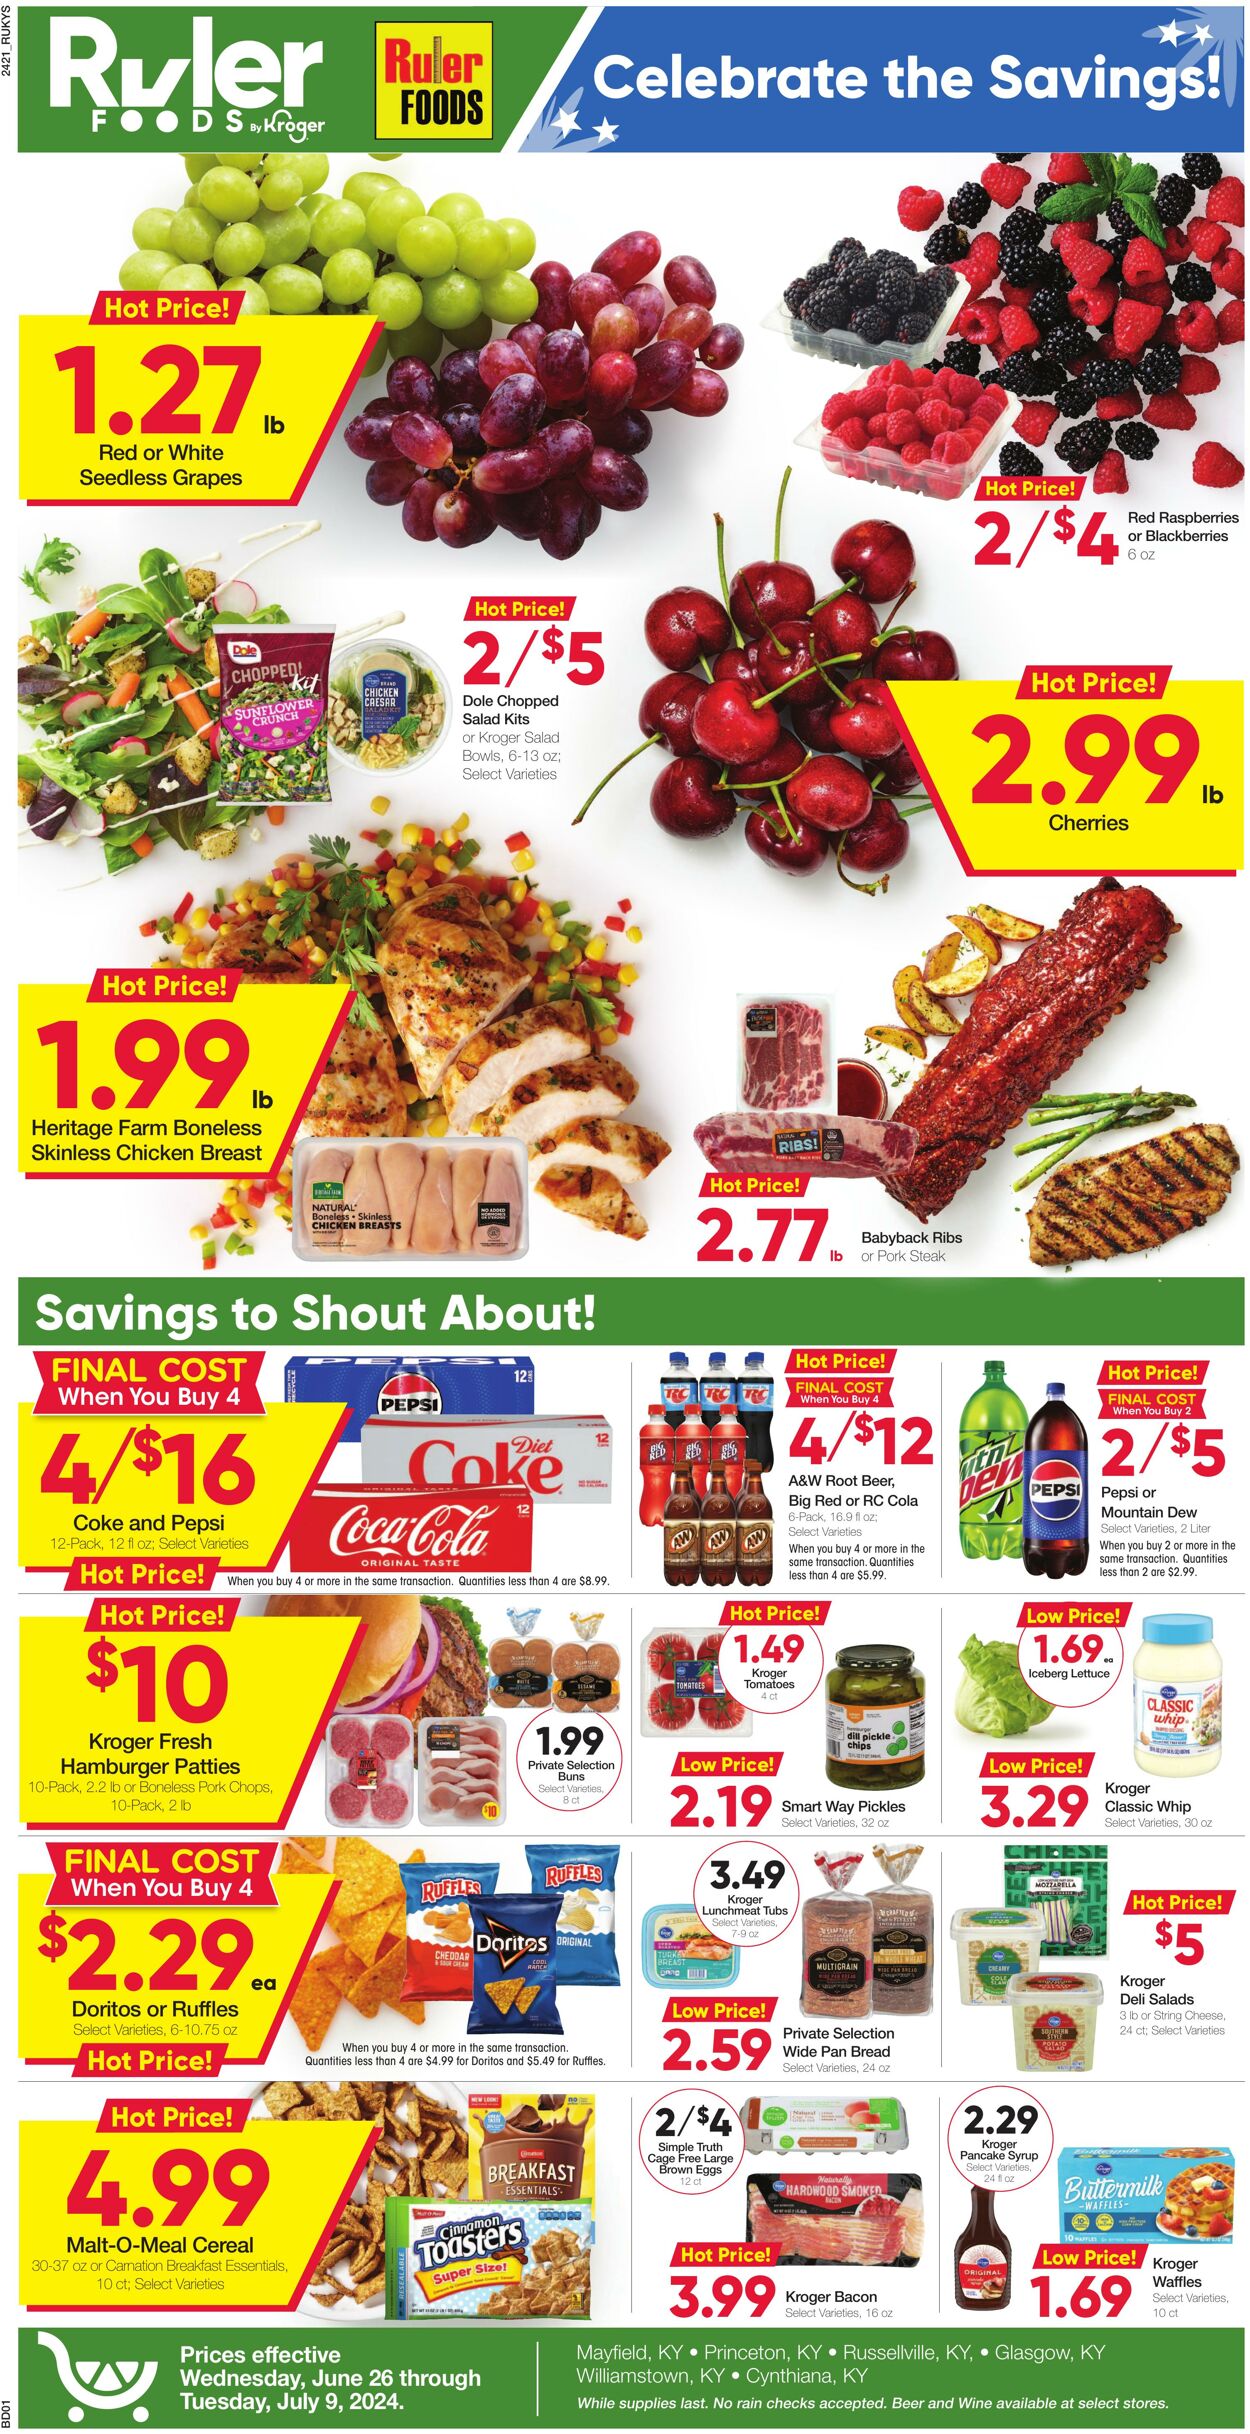 Ruler Foods Promotional weekly ads